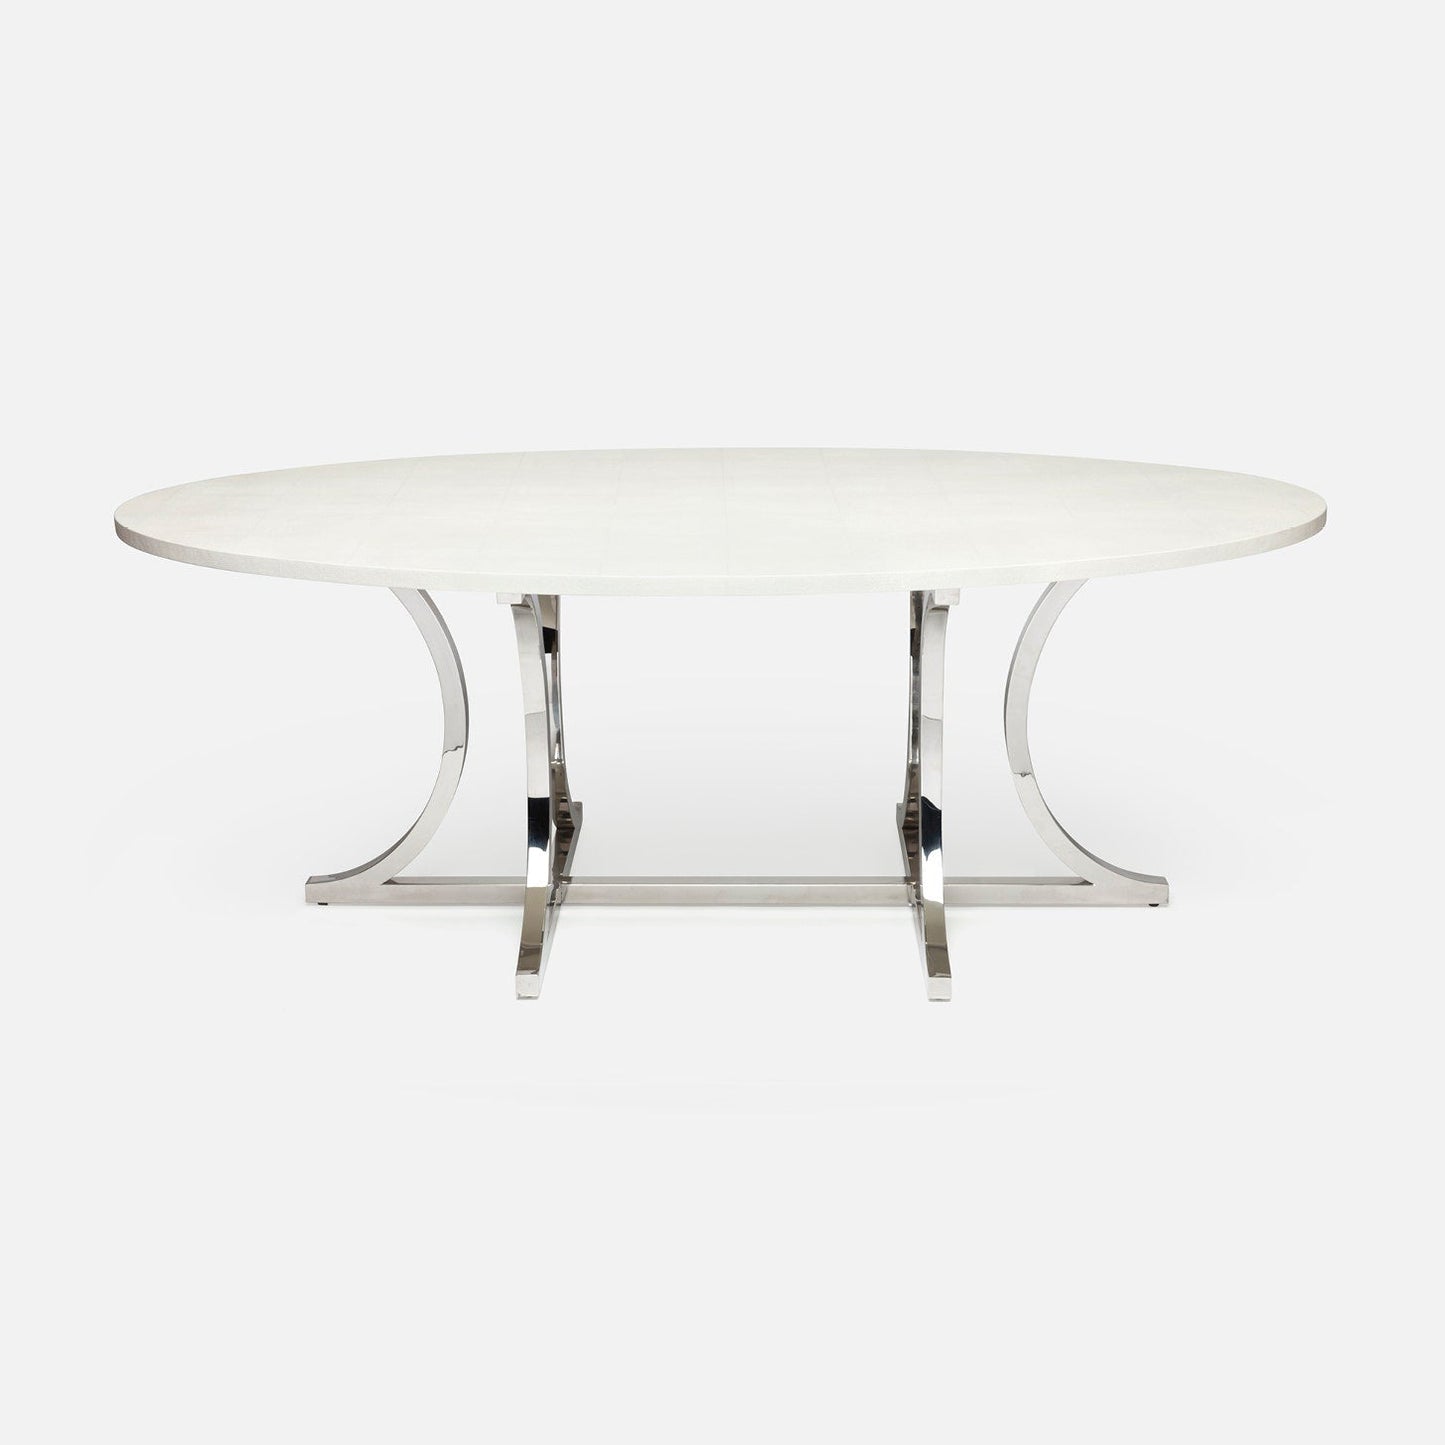 Made Goods Leighton 72" x 42" x 30" Polished Silver Steel Dinning Table With Oval Pristine Vintage Faux Shagreen Table Top